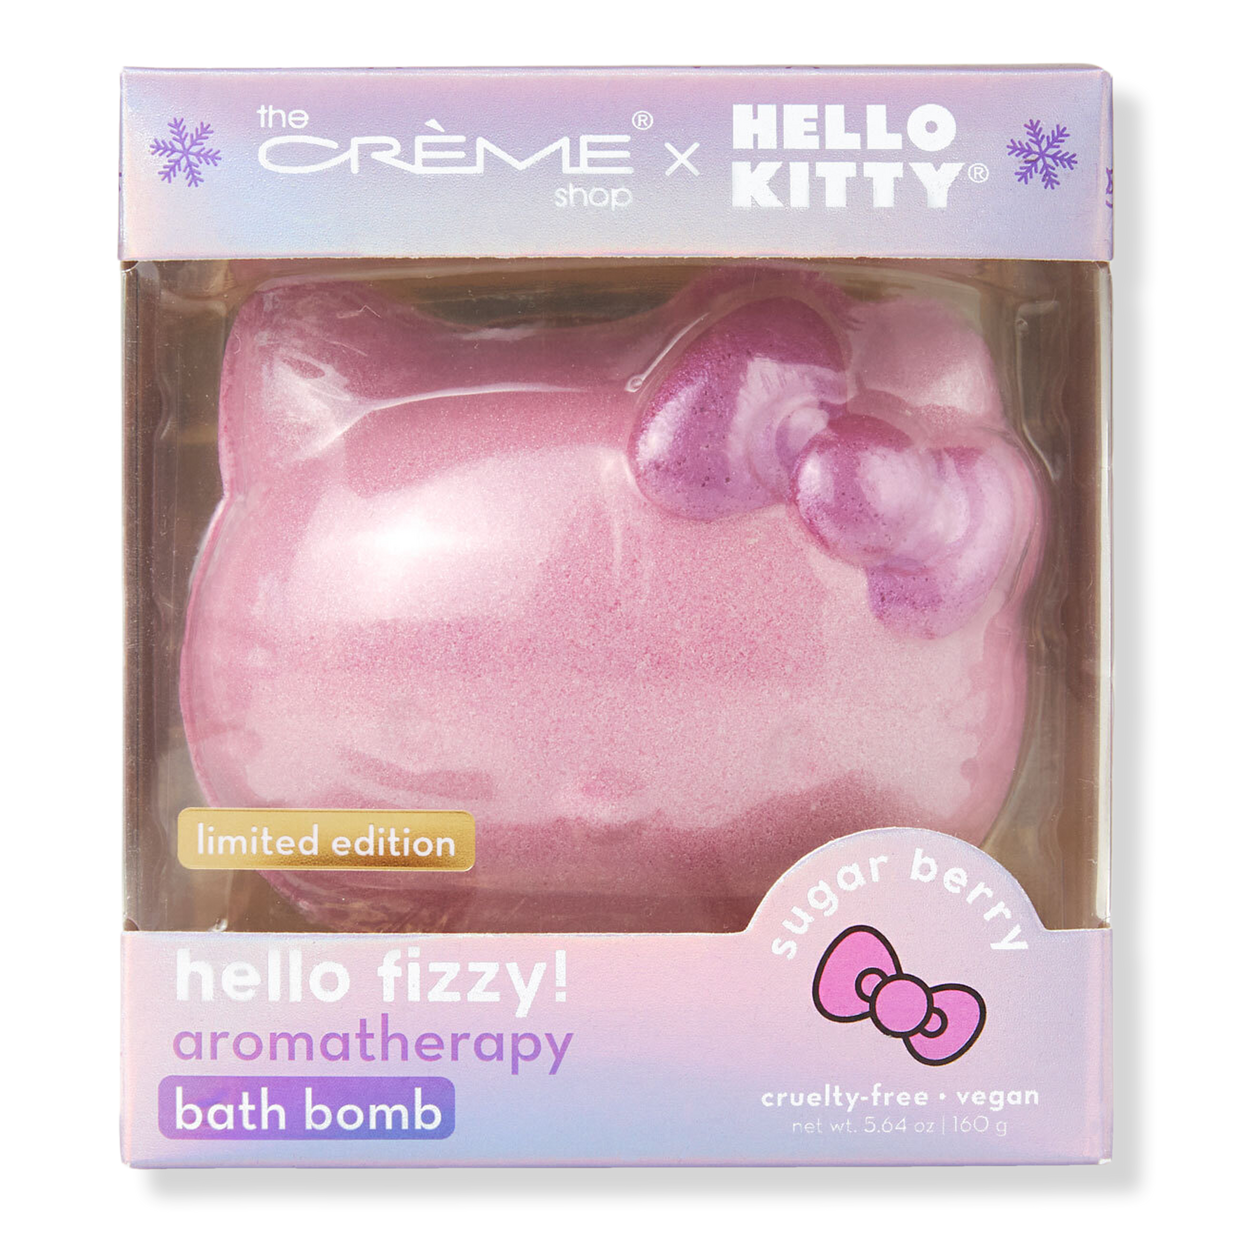 Hello kitty chanel, 3d, brands, chanel, designers hello kitty